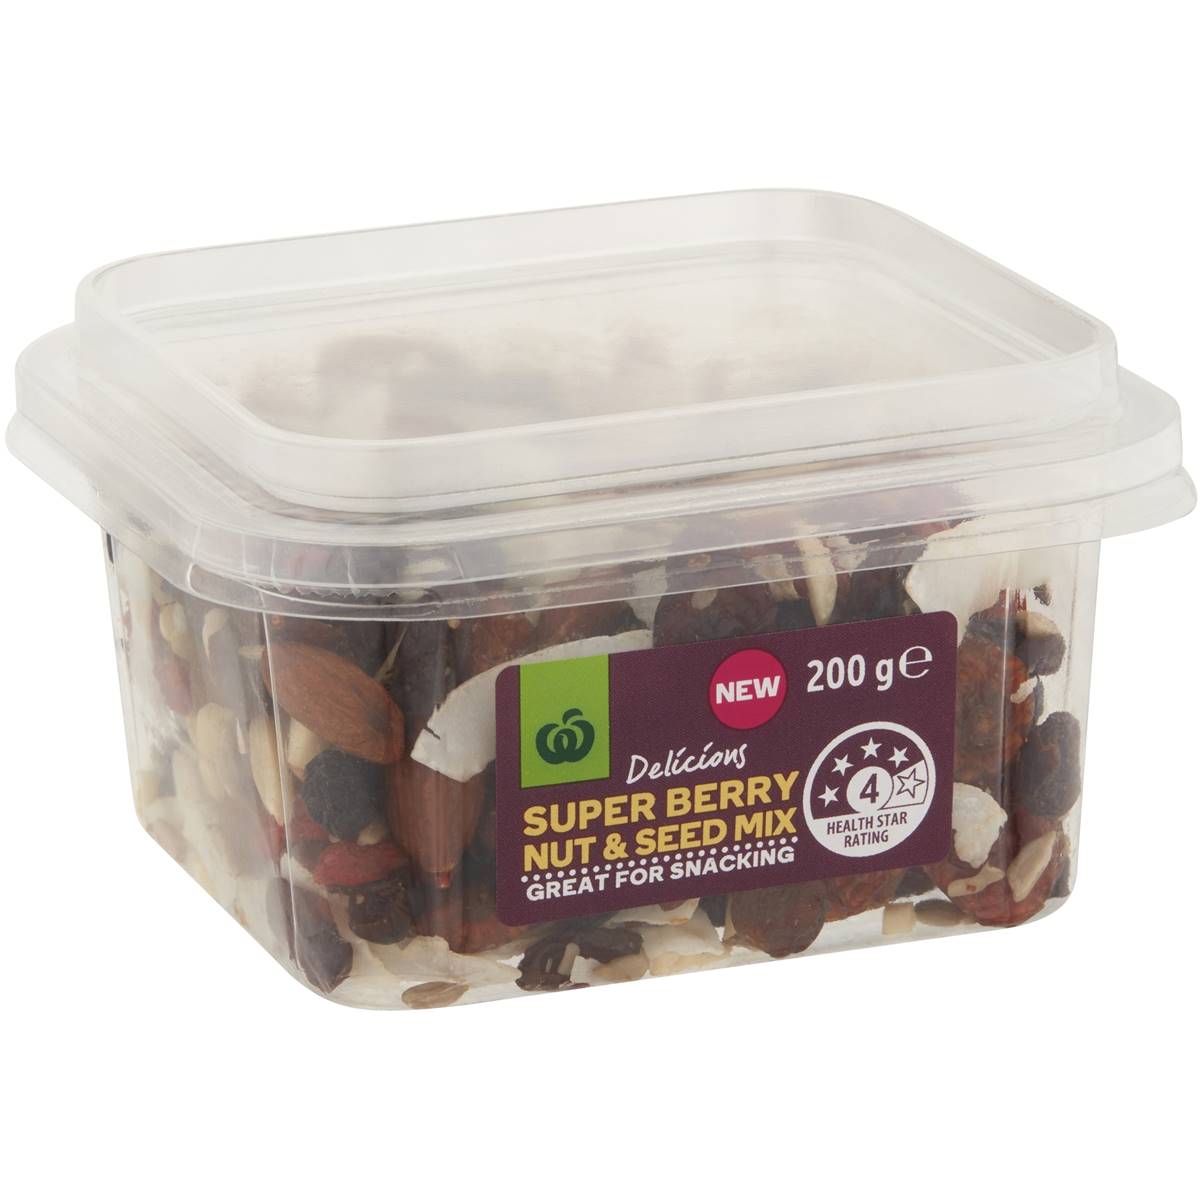 Calories in Woolworths Snack Pot Super Berry Nut & Seed Mix